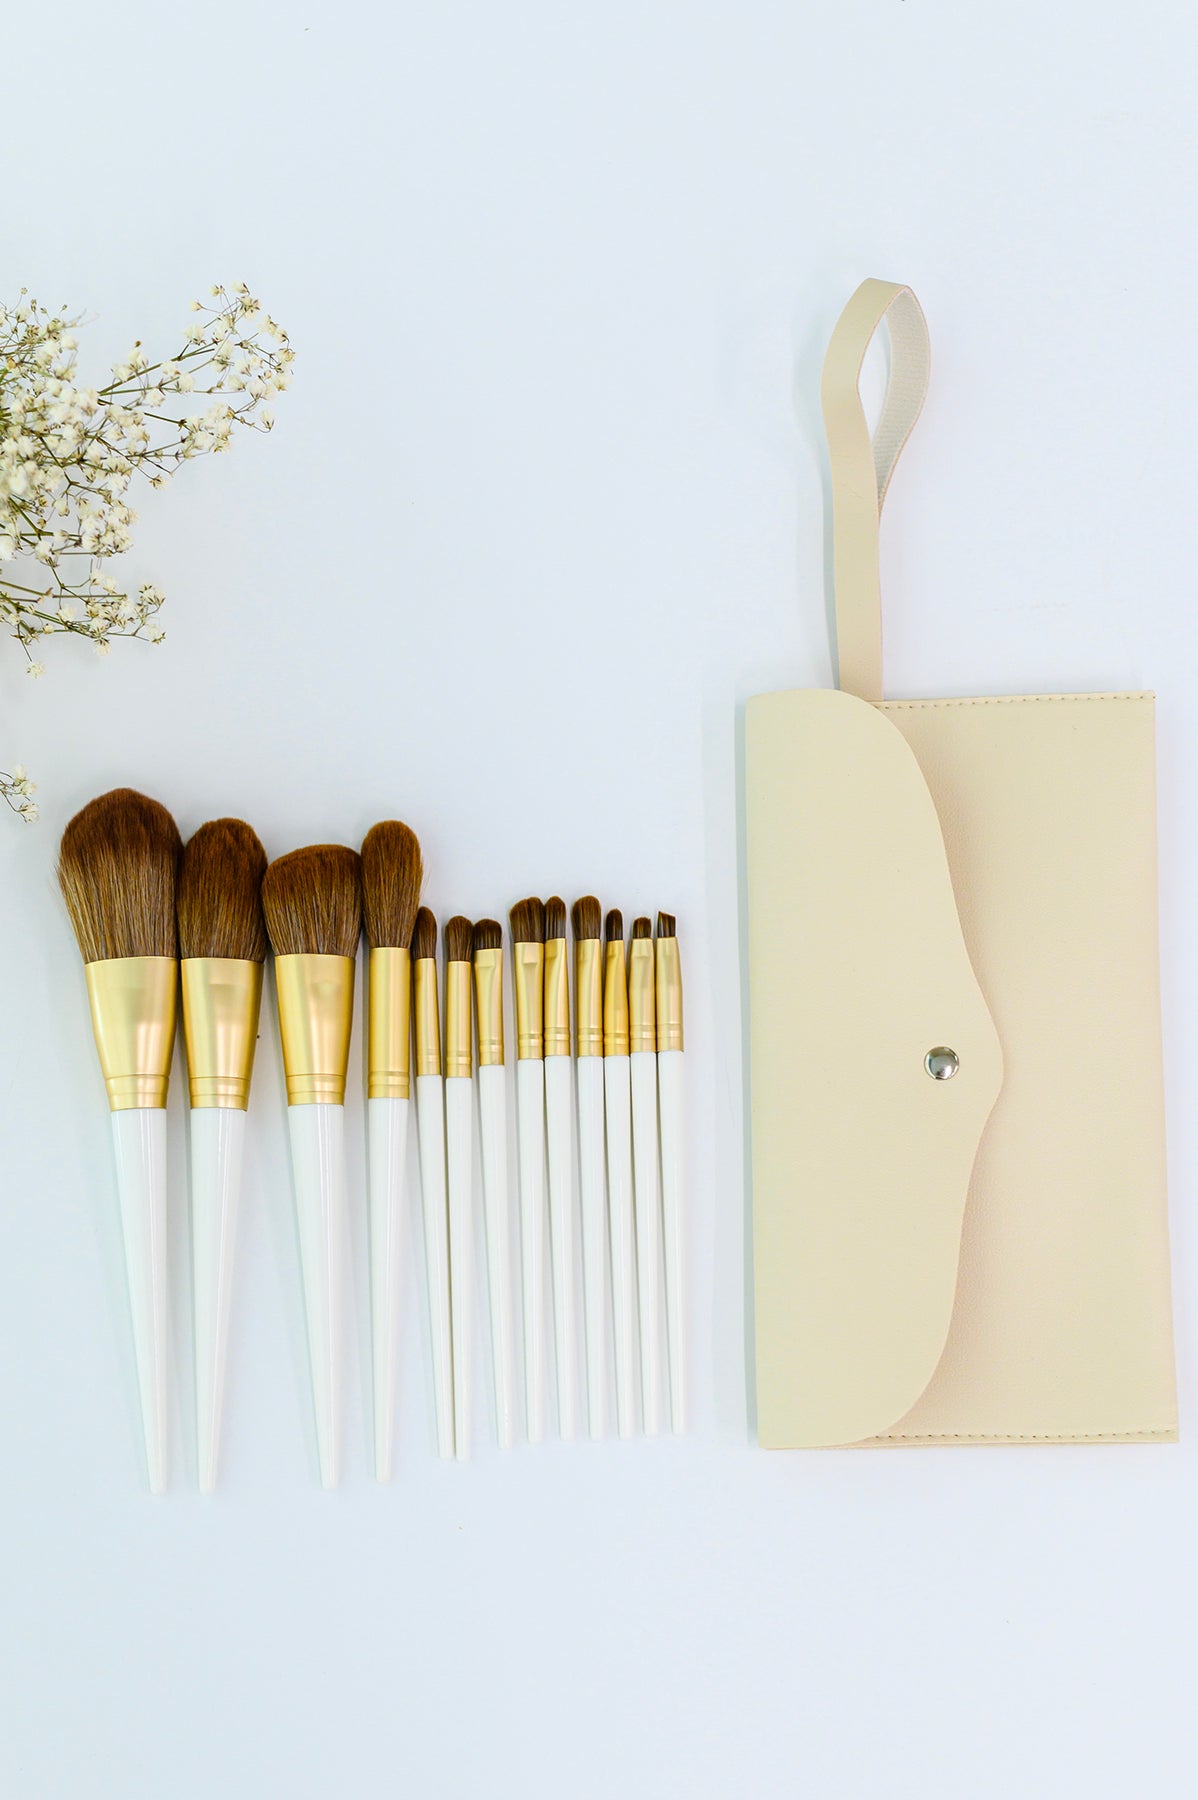 13 Piece Makeup Brush Kit with Case (Online Exclusive)